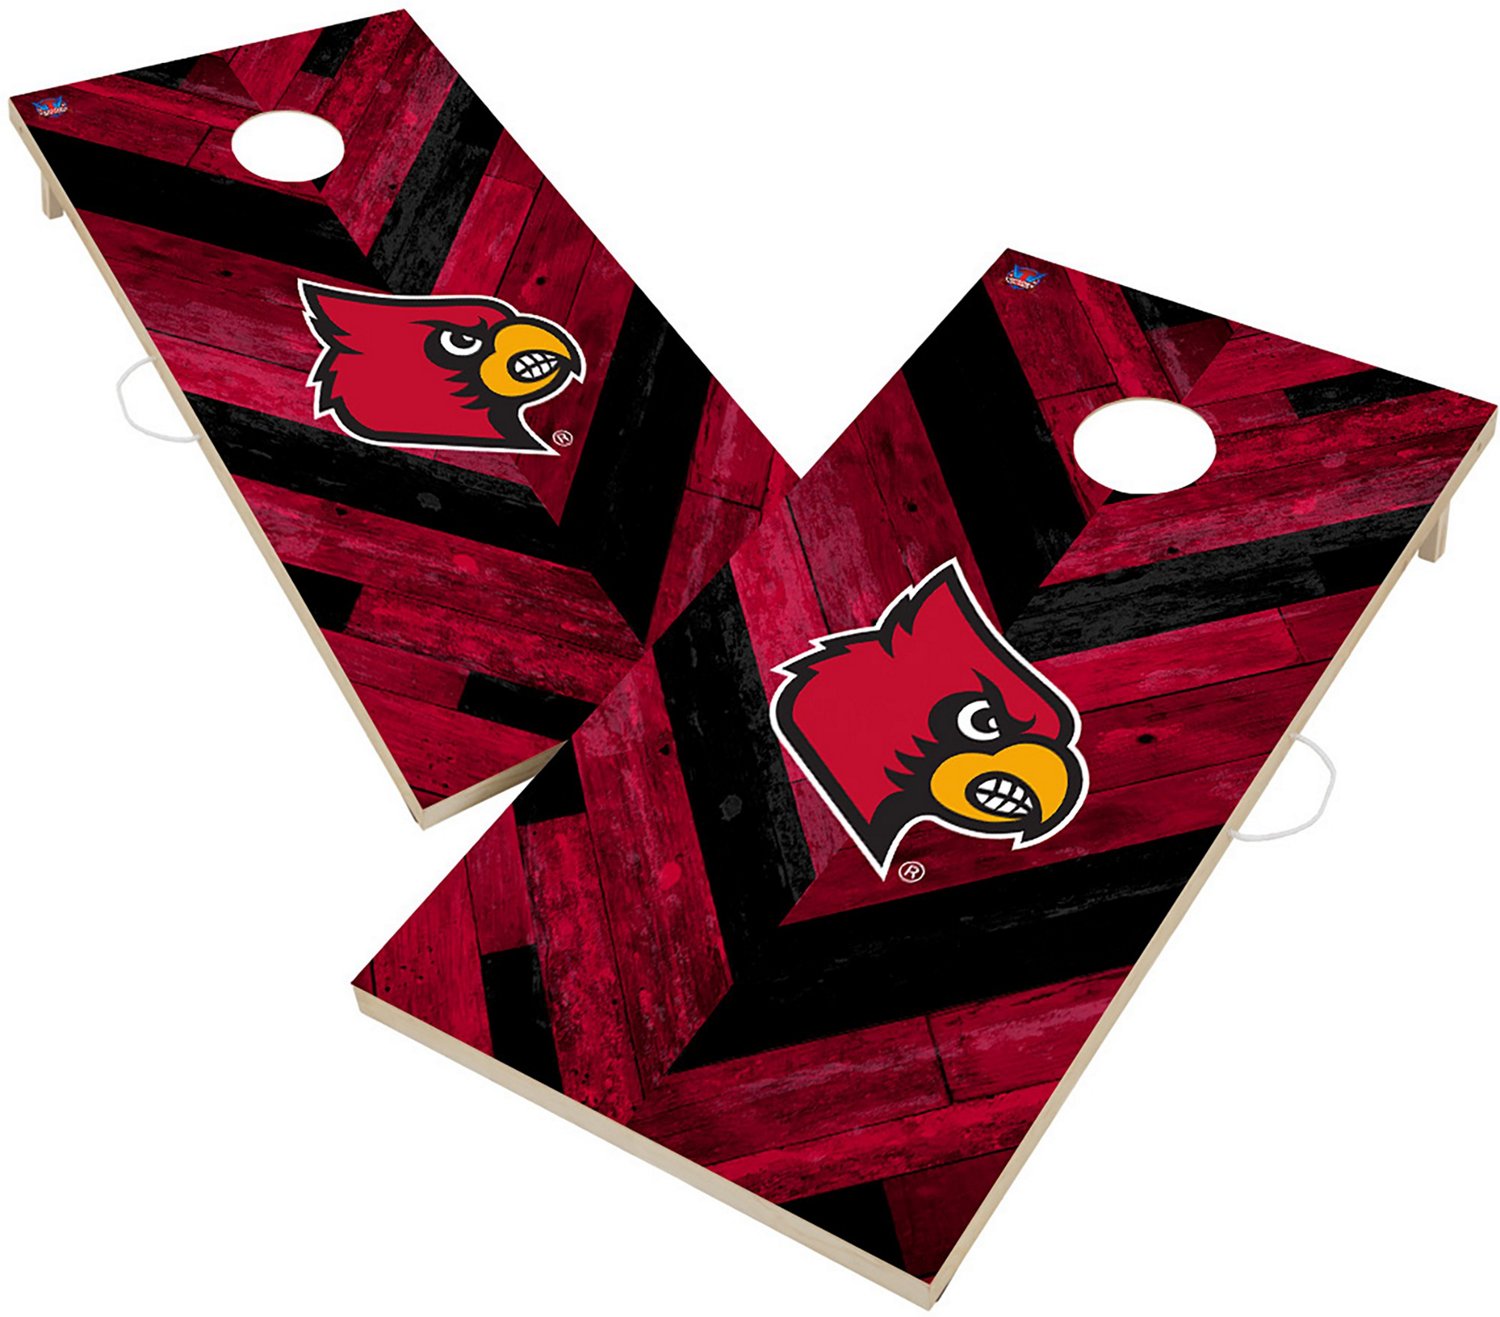 Louisville Cardinals About Town Blanket by Thirty-One - perfect for my  football tailgates! www.mythirtyone.com/d…